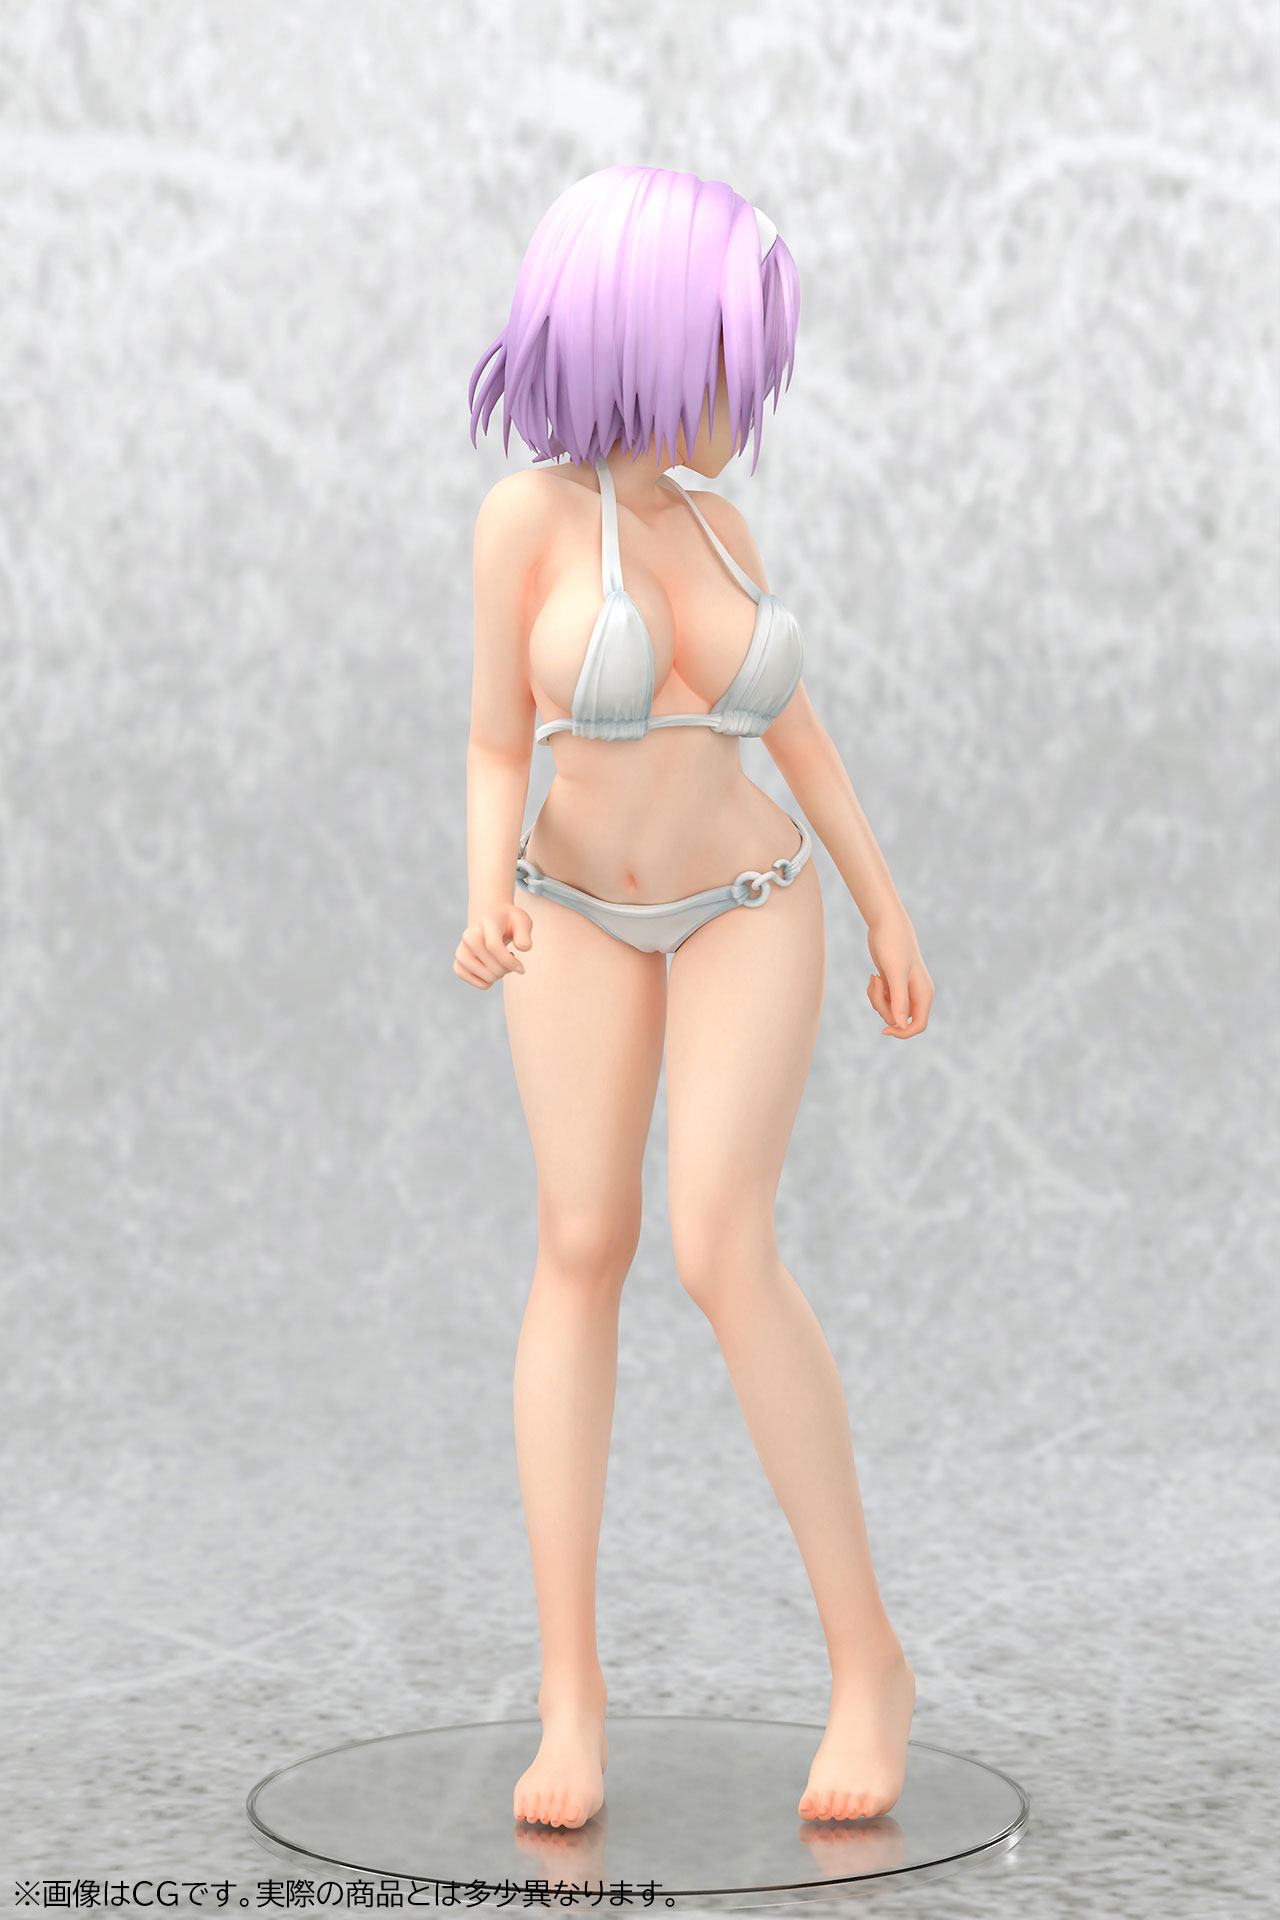 Swimmsuit Girl Collection